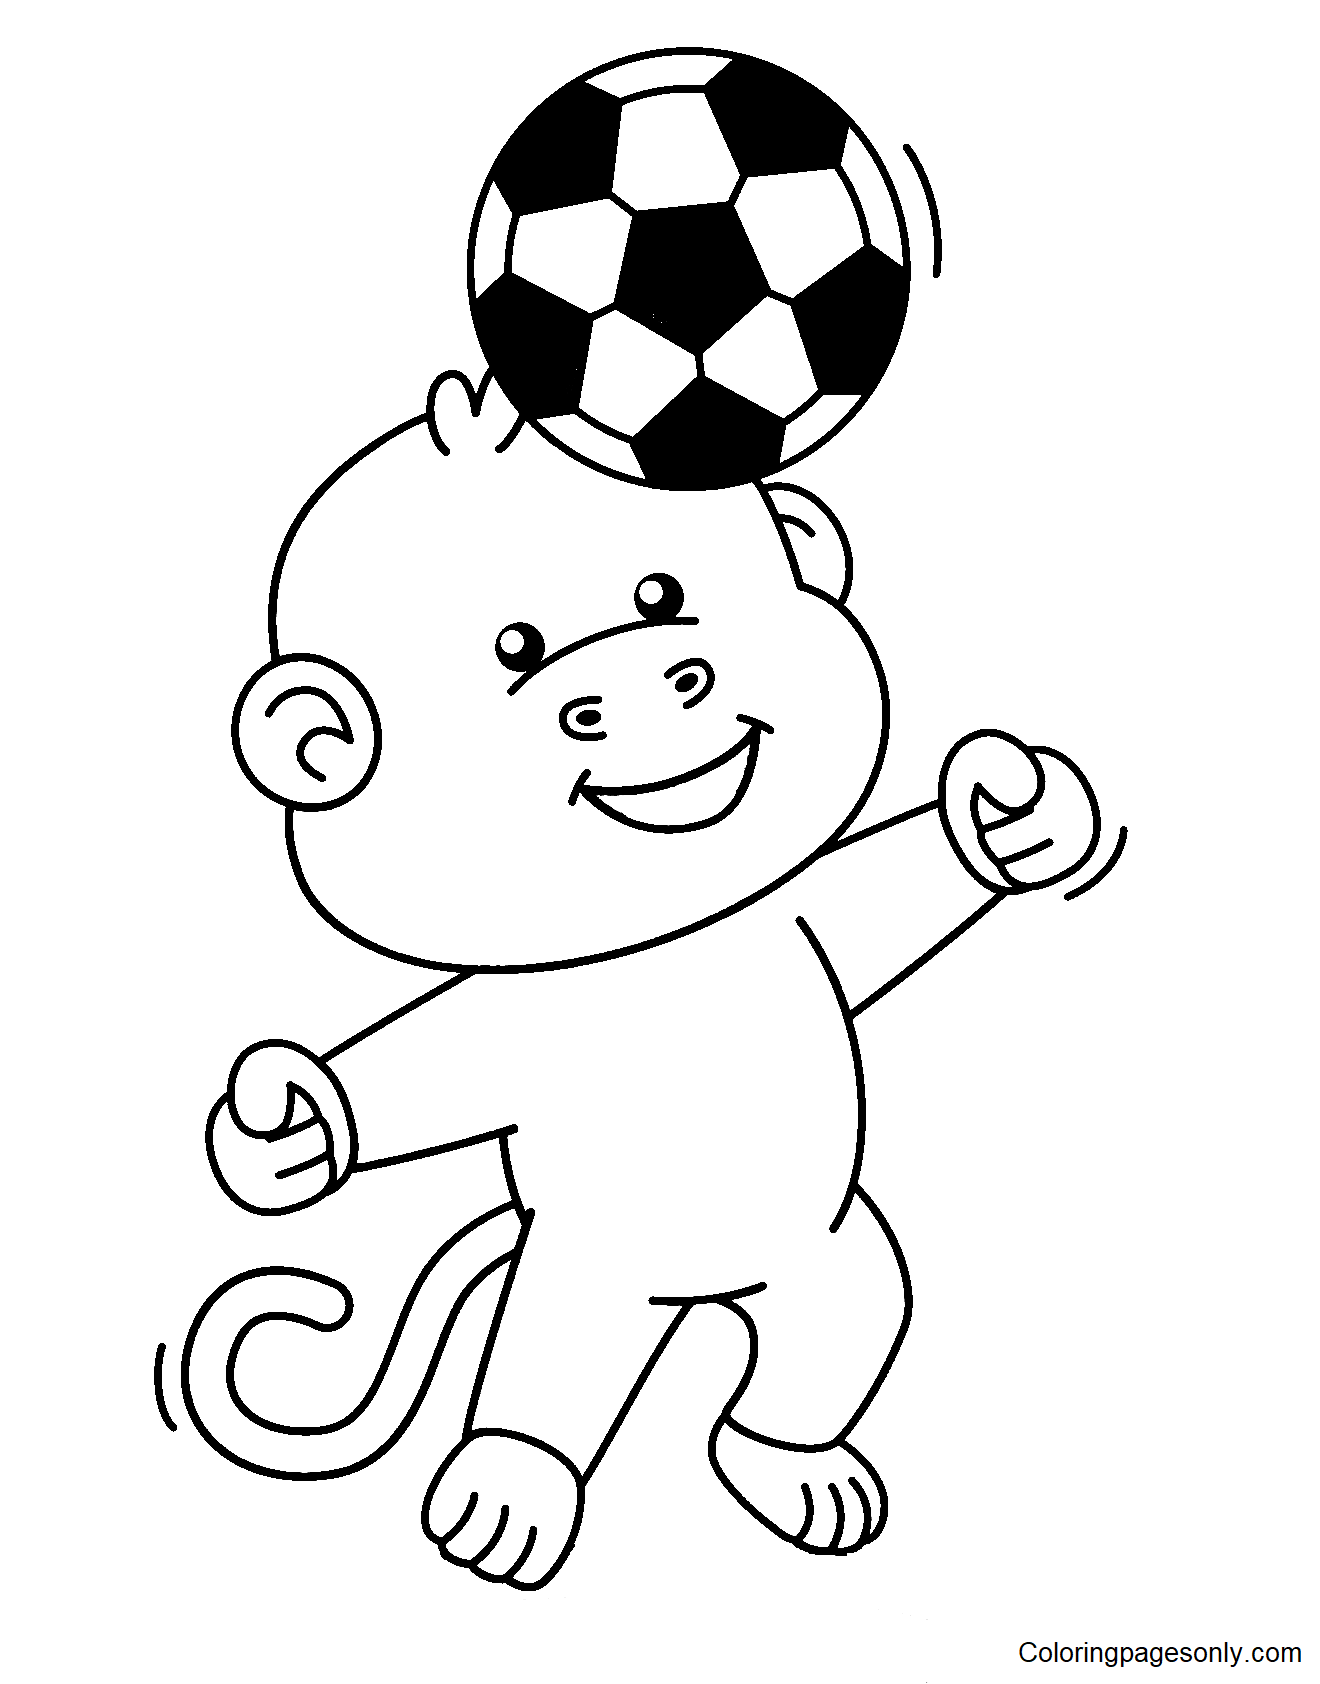 Cute Monkey Playing Soccer Coloring Page